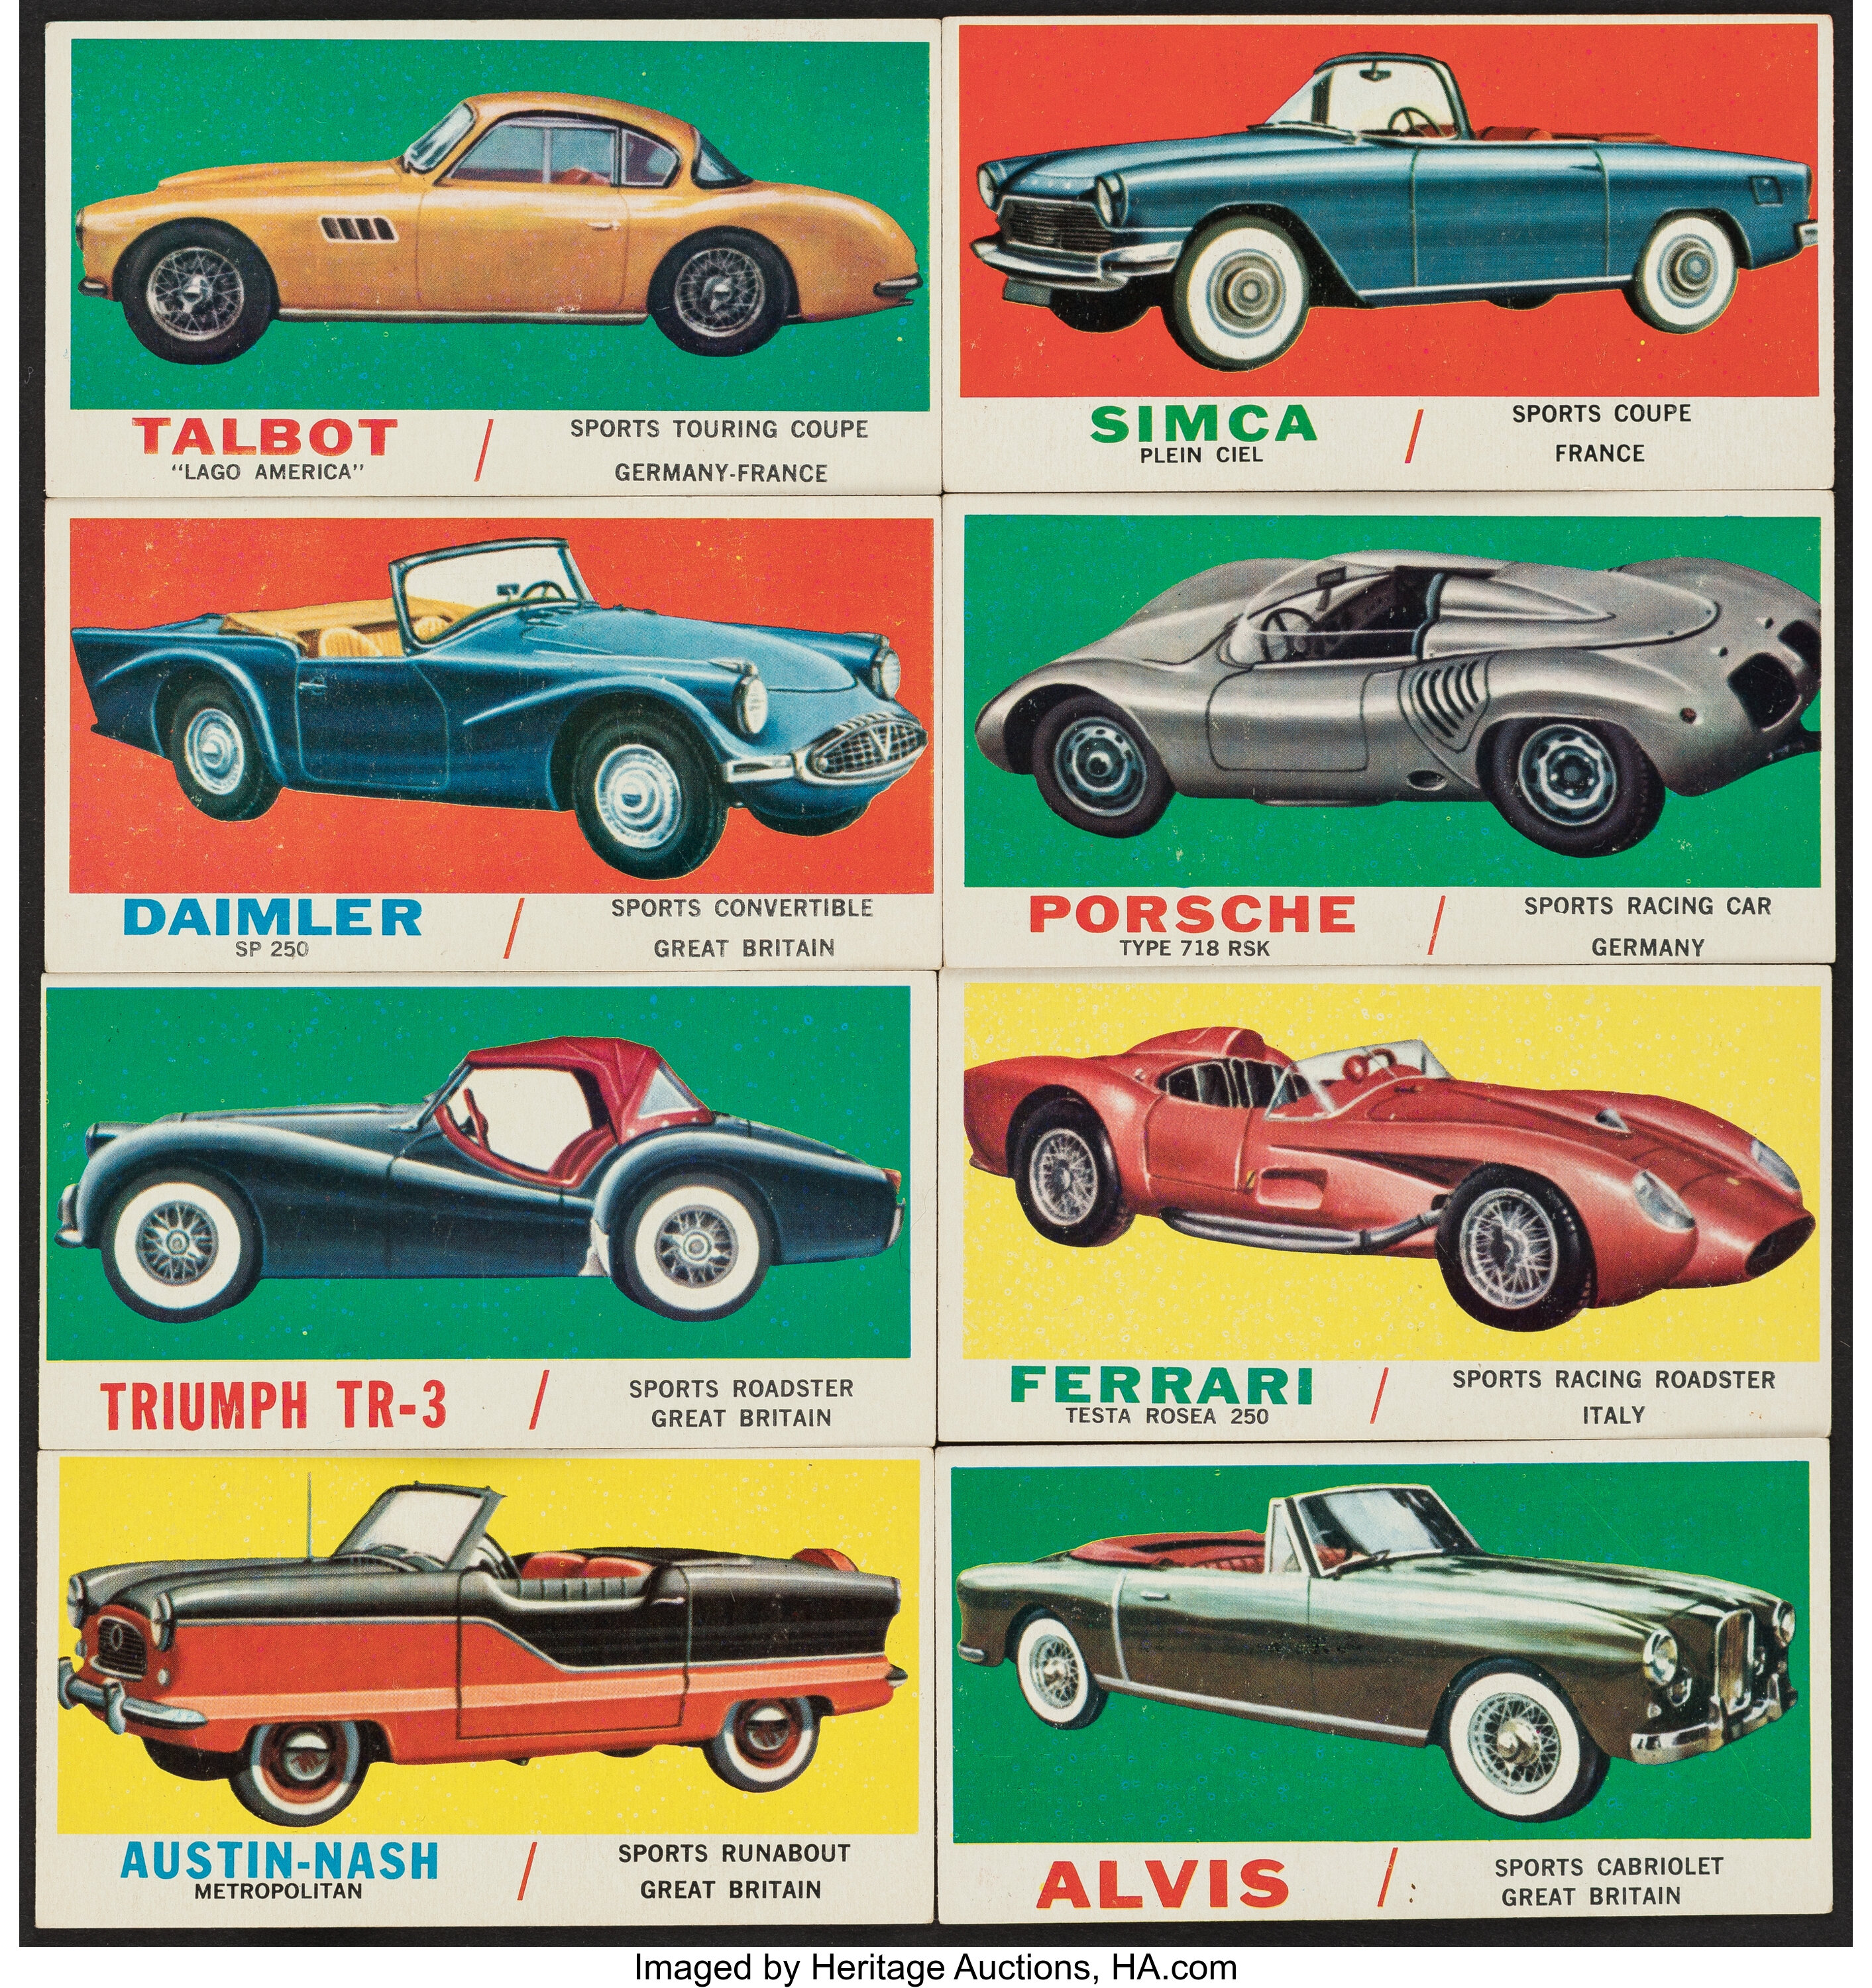 1961 topps sports cars complete set 66 non sport cards lot 41111 heritage auctions https sports ha com itm non sport cards sets 1961 topps sports cars complete set 66 a 151922 41111 s